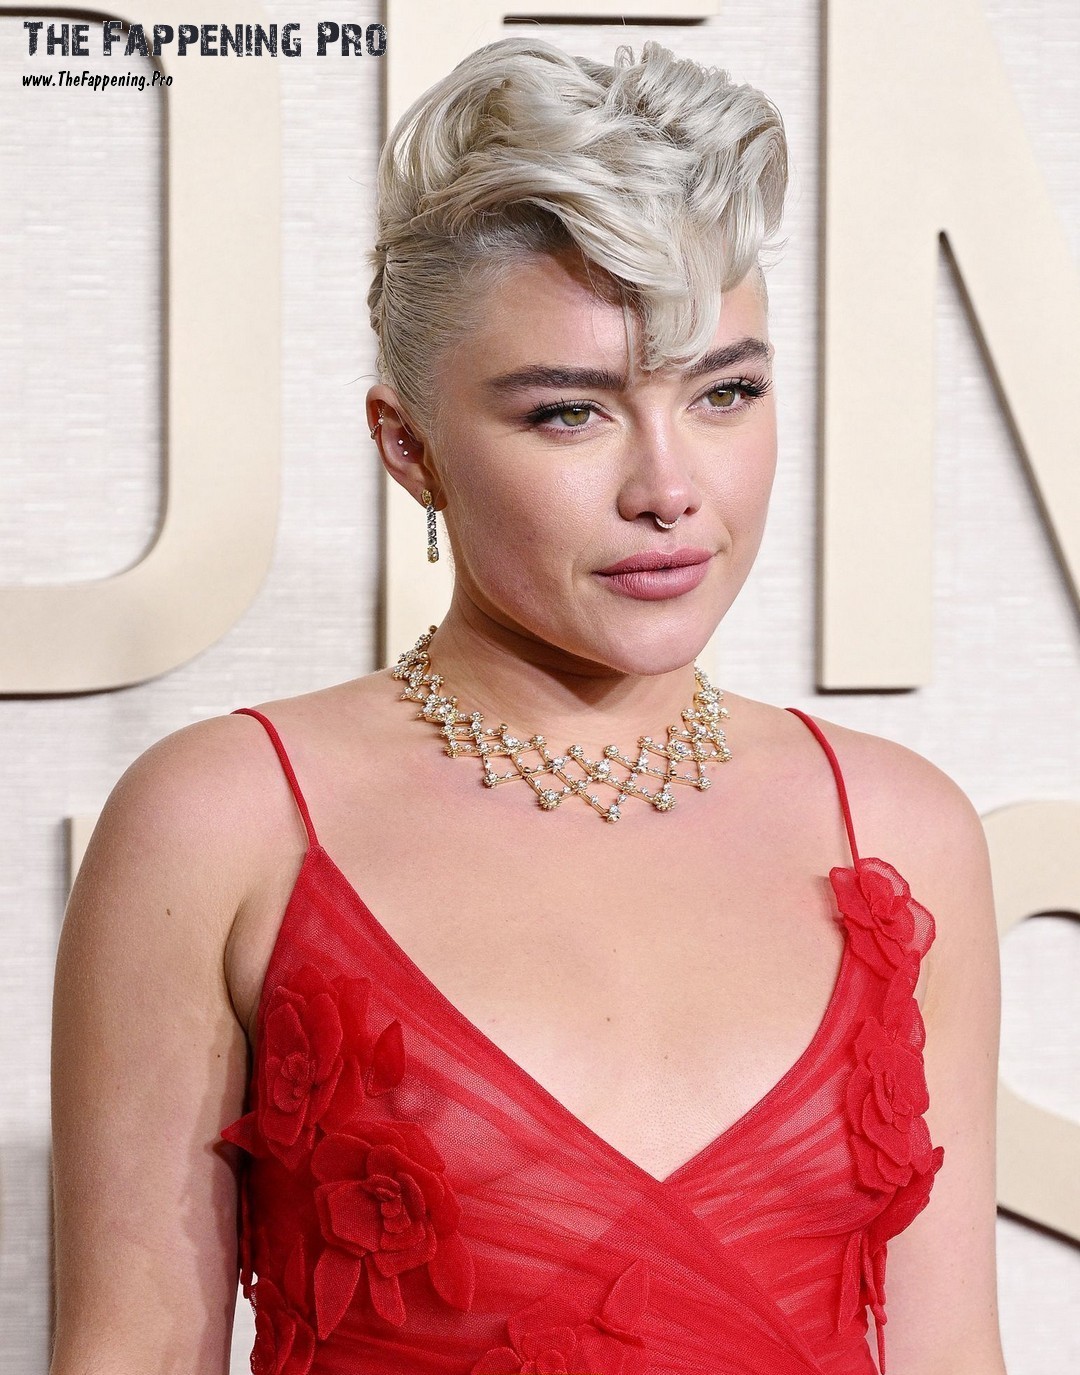 Witness the jaw-dropping moment at the Golden Globe Awards in 2024 as Florence Pugh stunned in a revealing red dress that left little to the imagination. With no bra beneath her off-the-shoulder gown, the actress made headlines as paparazzi captured intimate shots of her daring fashion choice. Experience the thrill of the red carpet moment that had everyone talking.